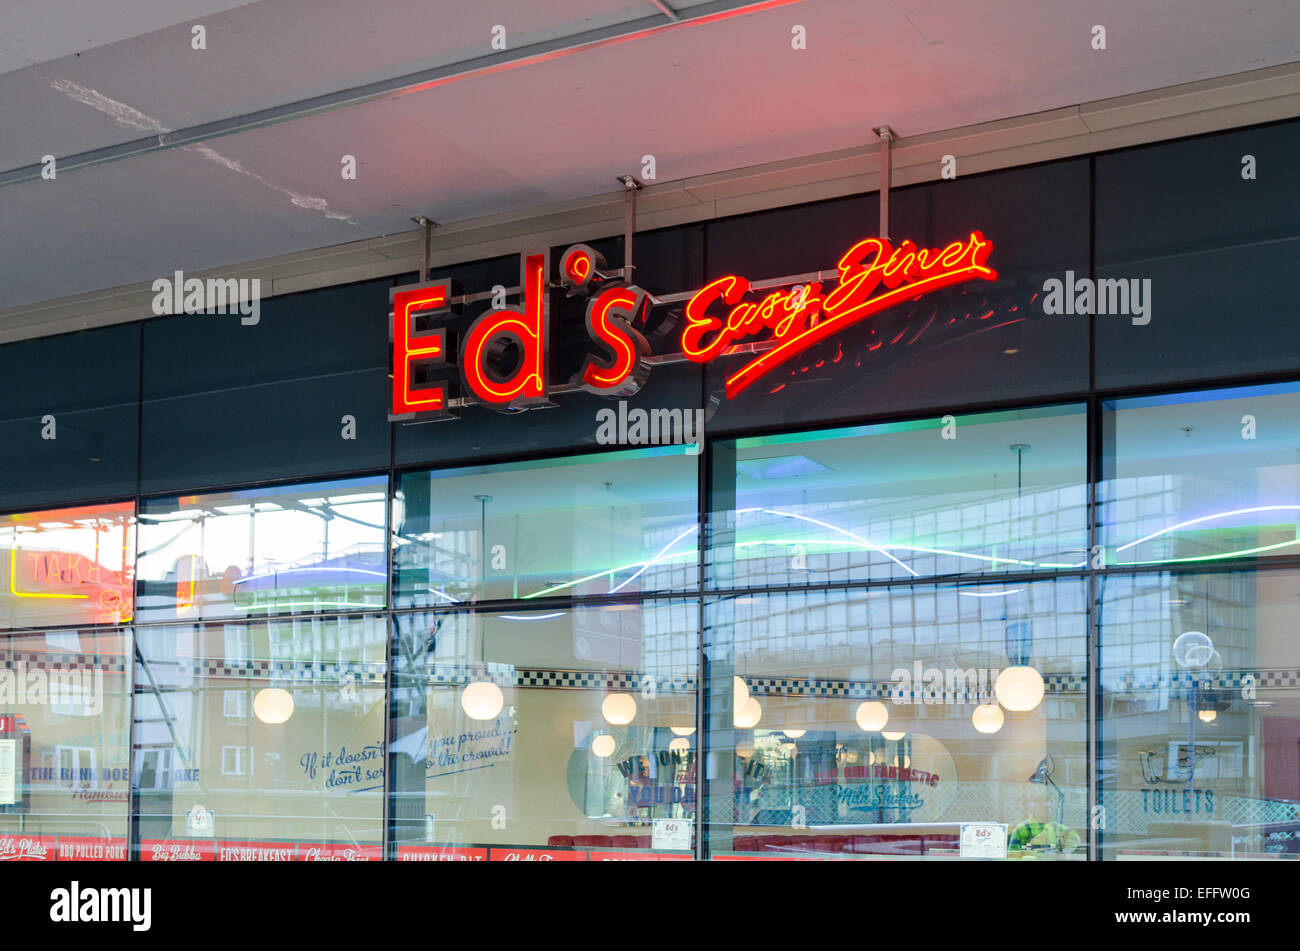 Ed's Easy Diner at the newly refurbished Barclaycard Arena, formerly the NIA, in Birmingham Stock Photo